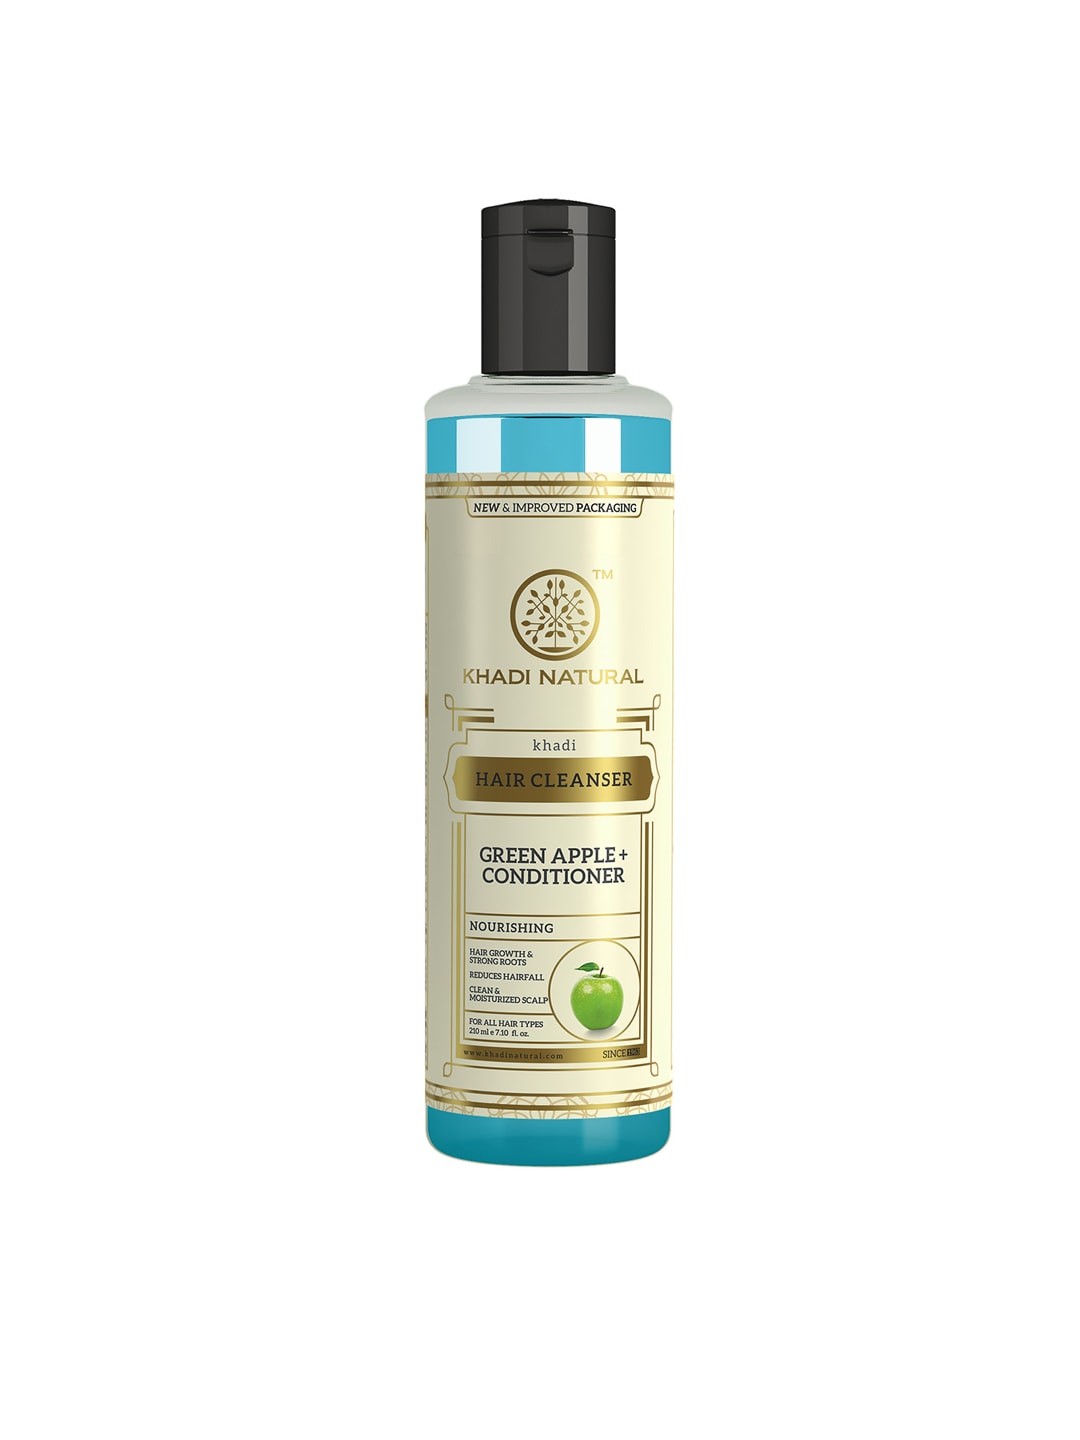 Khadi Natural Unisex Green Apple Hair Cleanser & Conditioner 210 ml Price in India